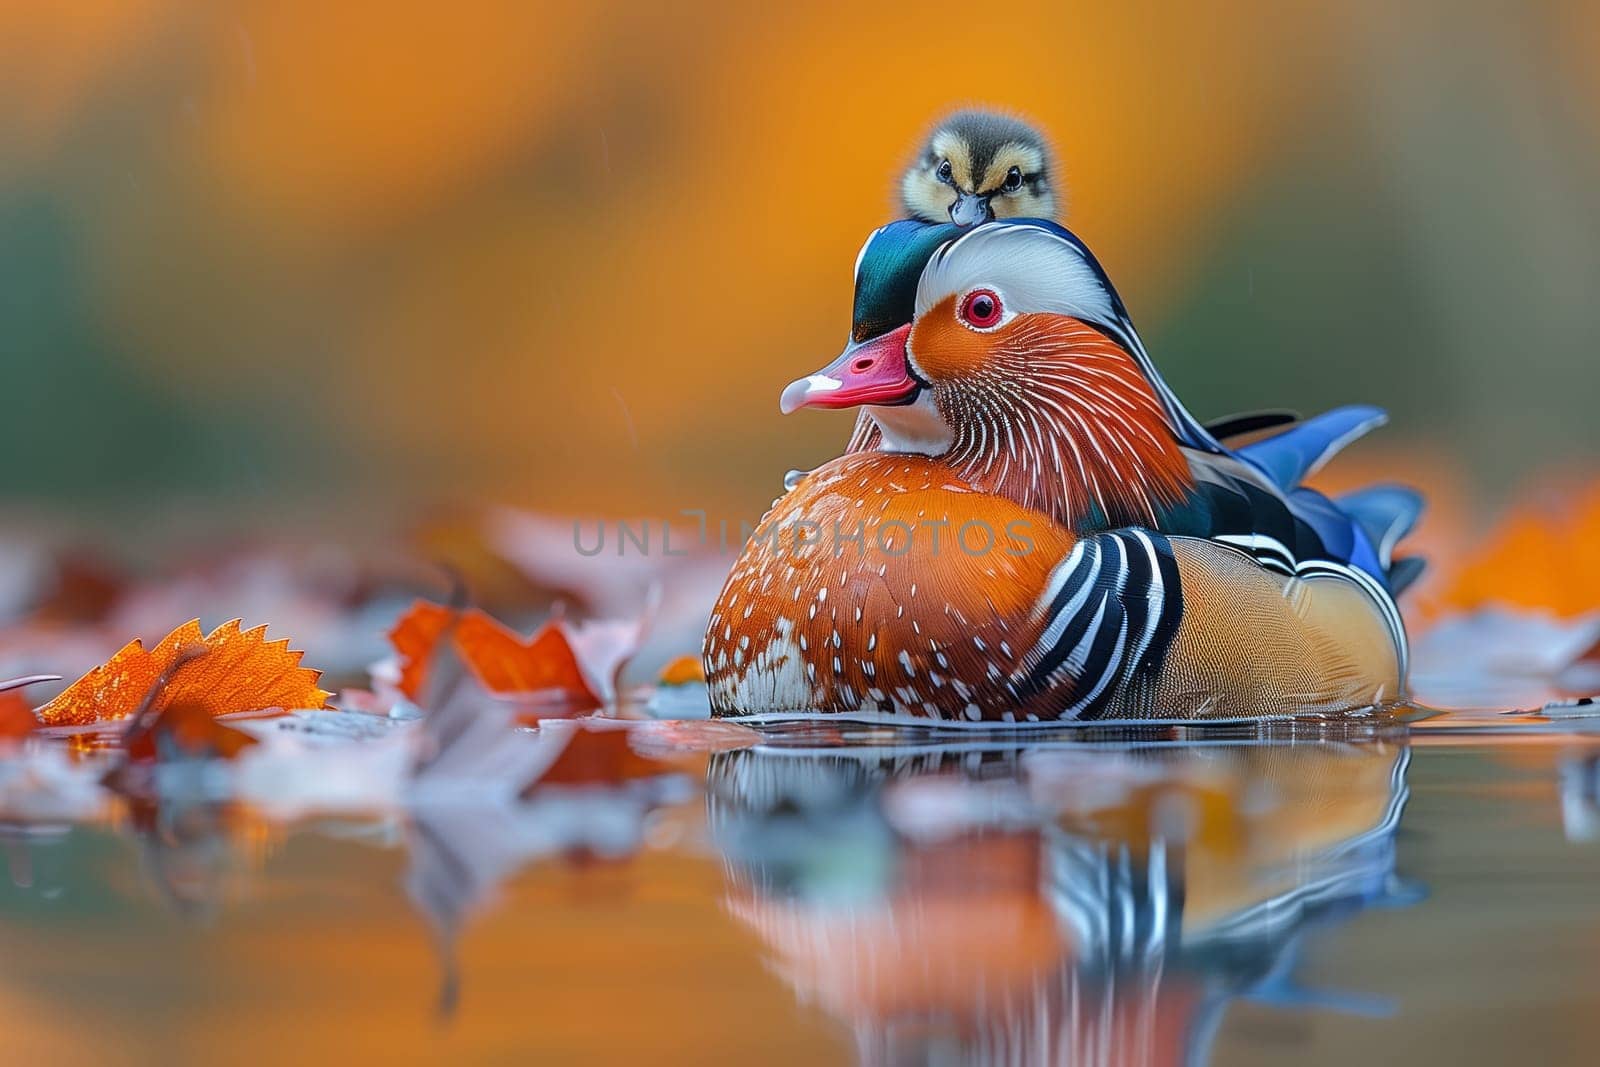 A Mandarin duck gracefully floats on water surrounded by leaves in a serene lake by richwolf